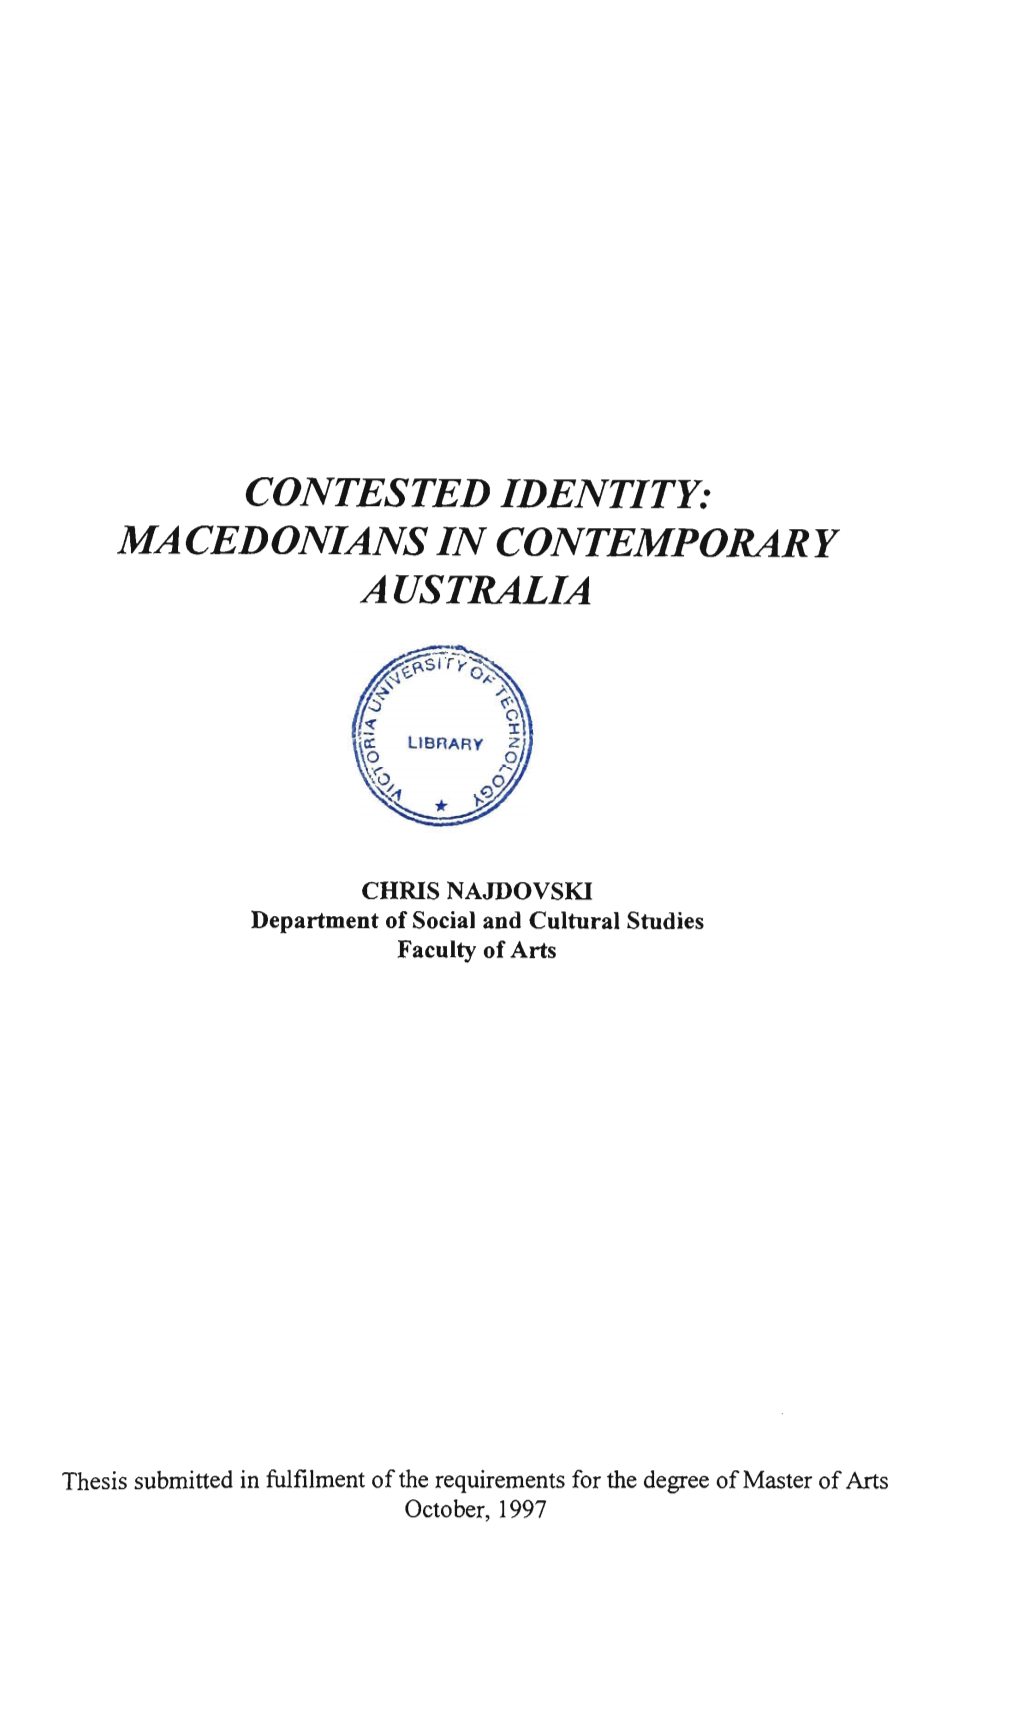 Contested Identity: Macedonians in Contemporary Australia